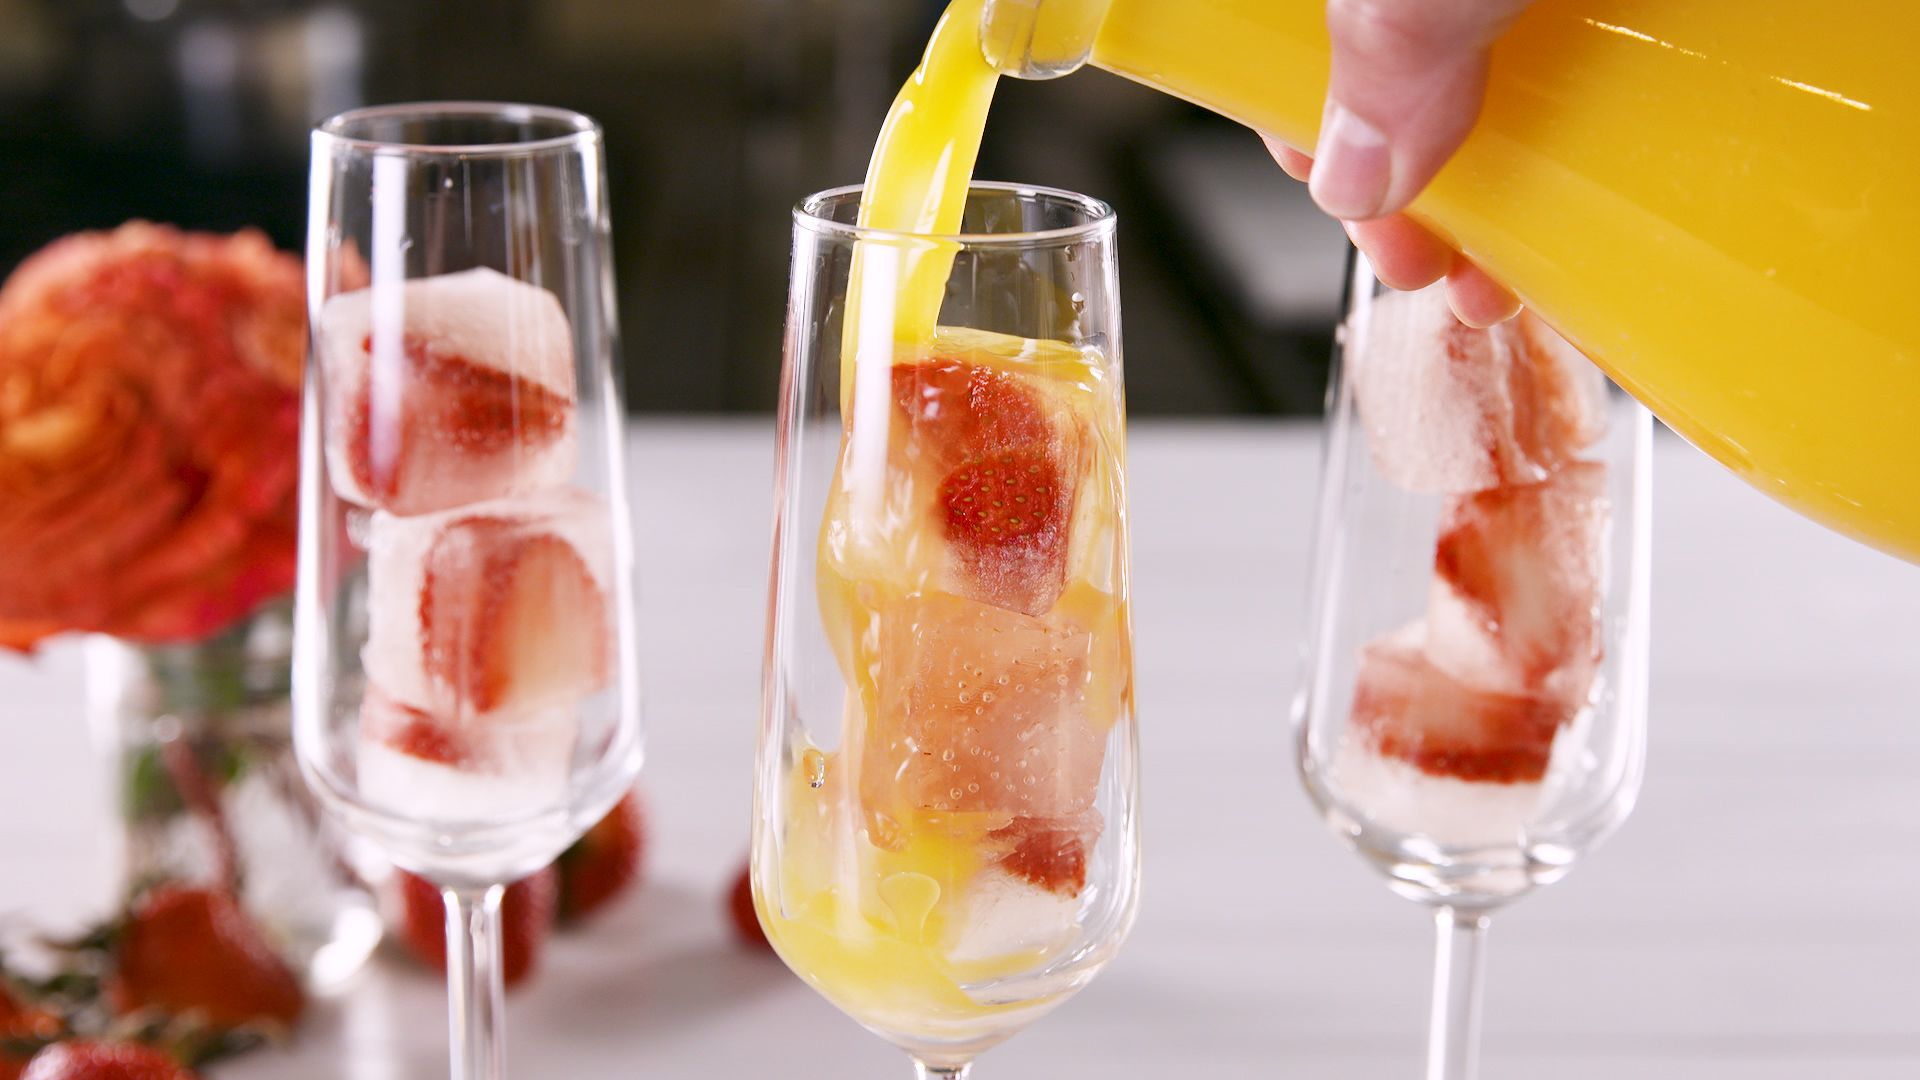 https://hips.hearstapps.com/hmg-prod/images/delish-prosecco-ice-cubes-001-1525705334.jpg